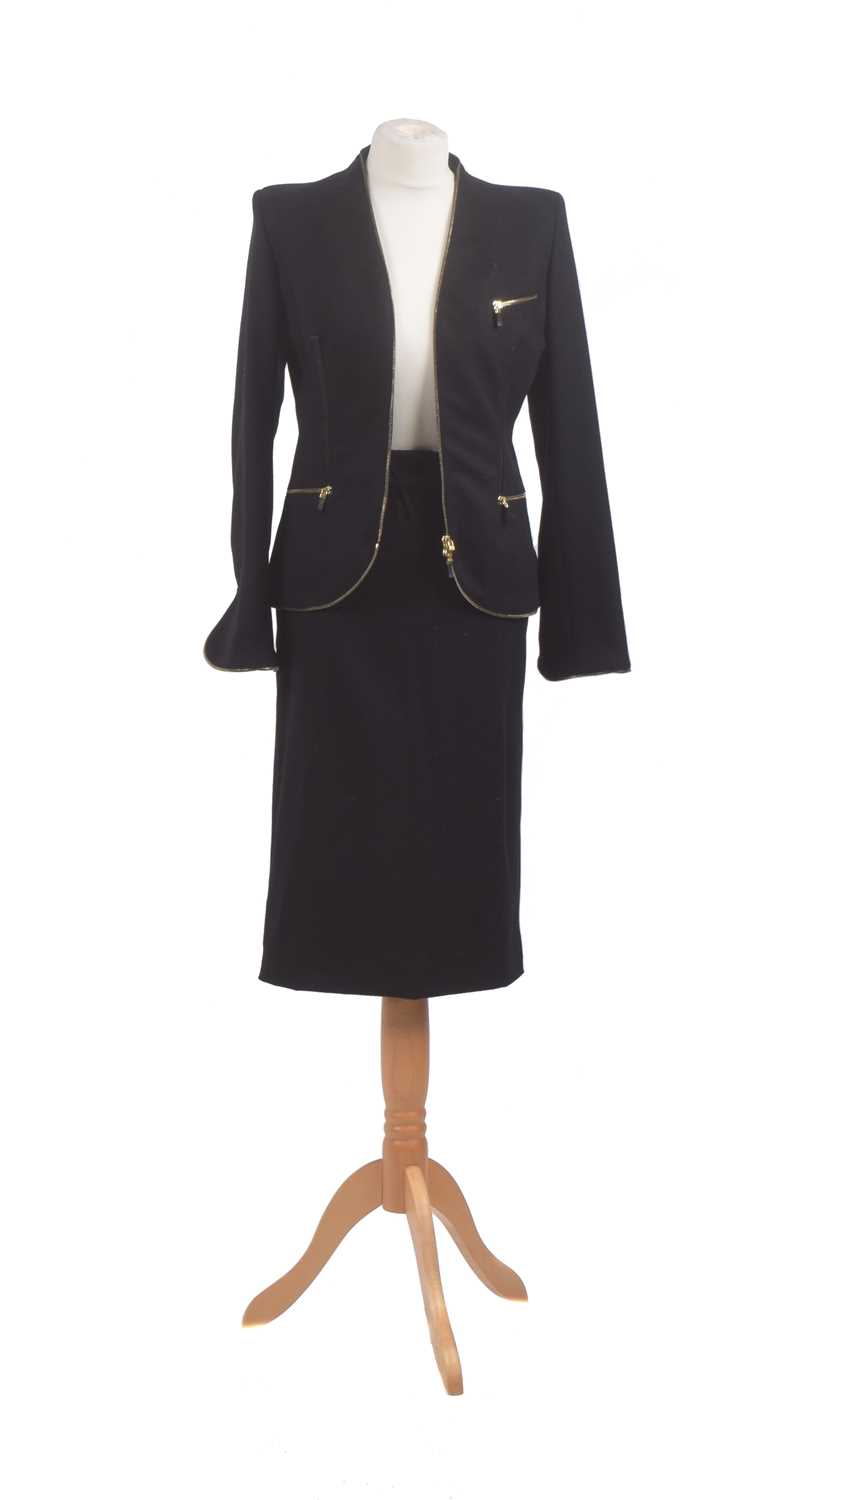 Lot 150 - A wool two-piece suit by Alexander McQueen